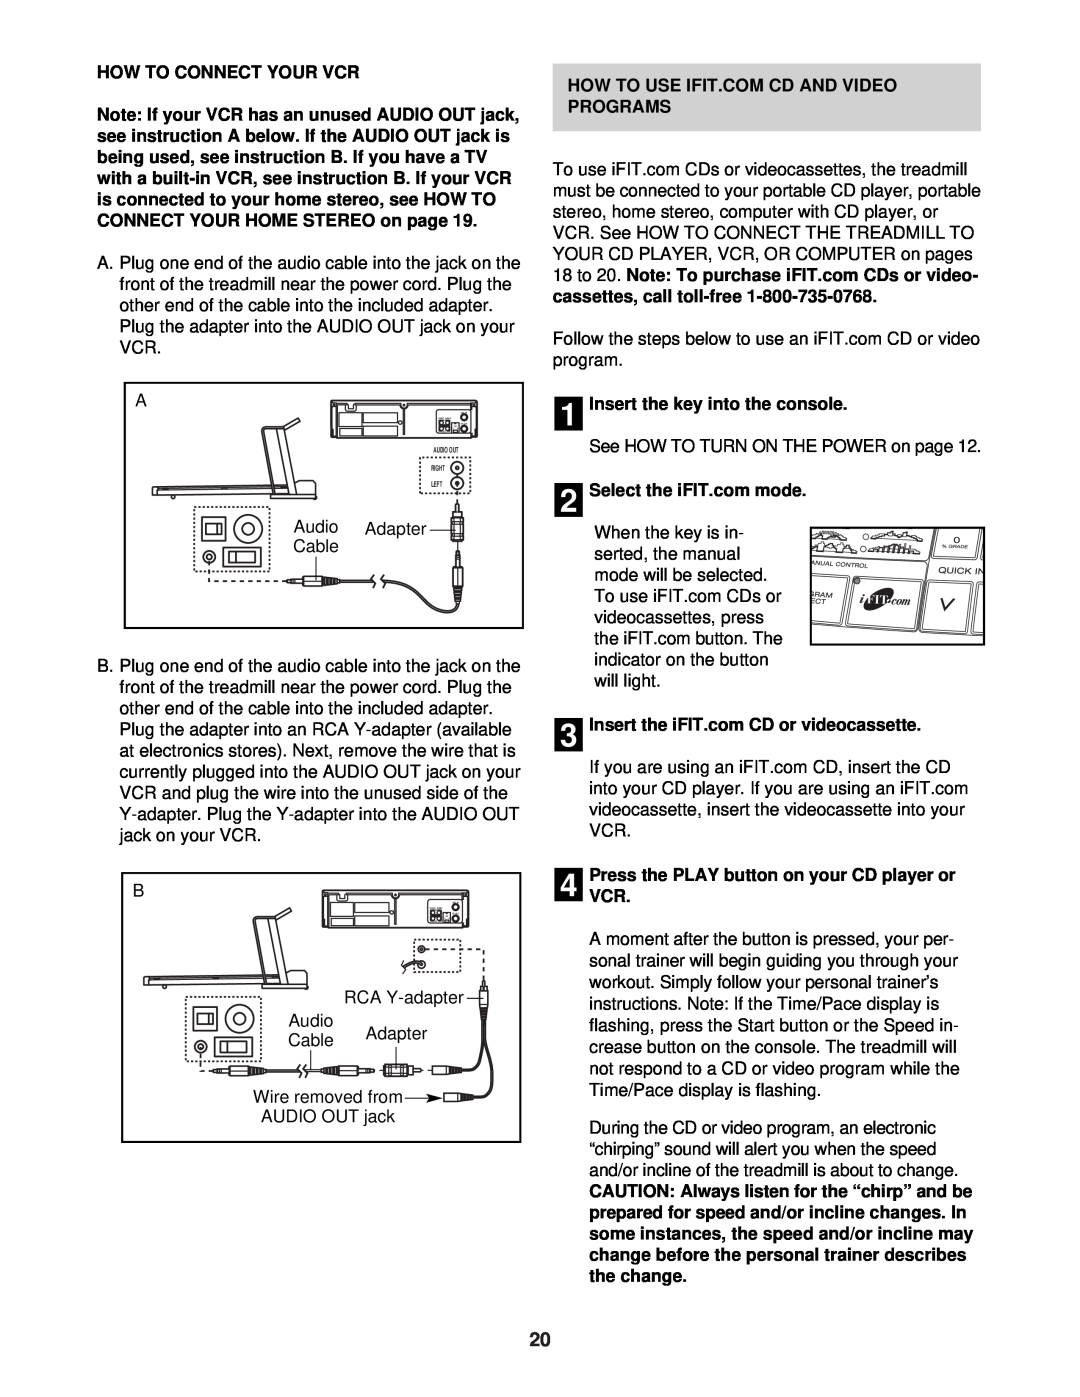 ProForm DTL72940 user manual How To Connect Your Vcr, Insert the key into the console, Select the iFIT.com mode 